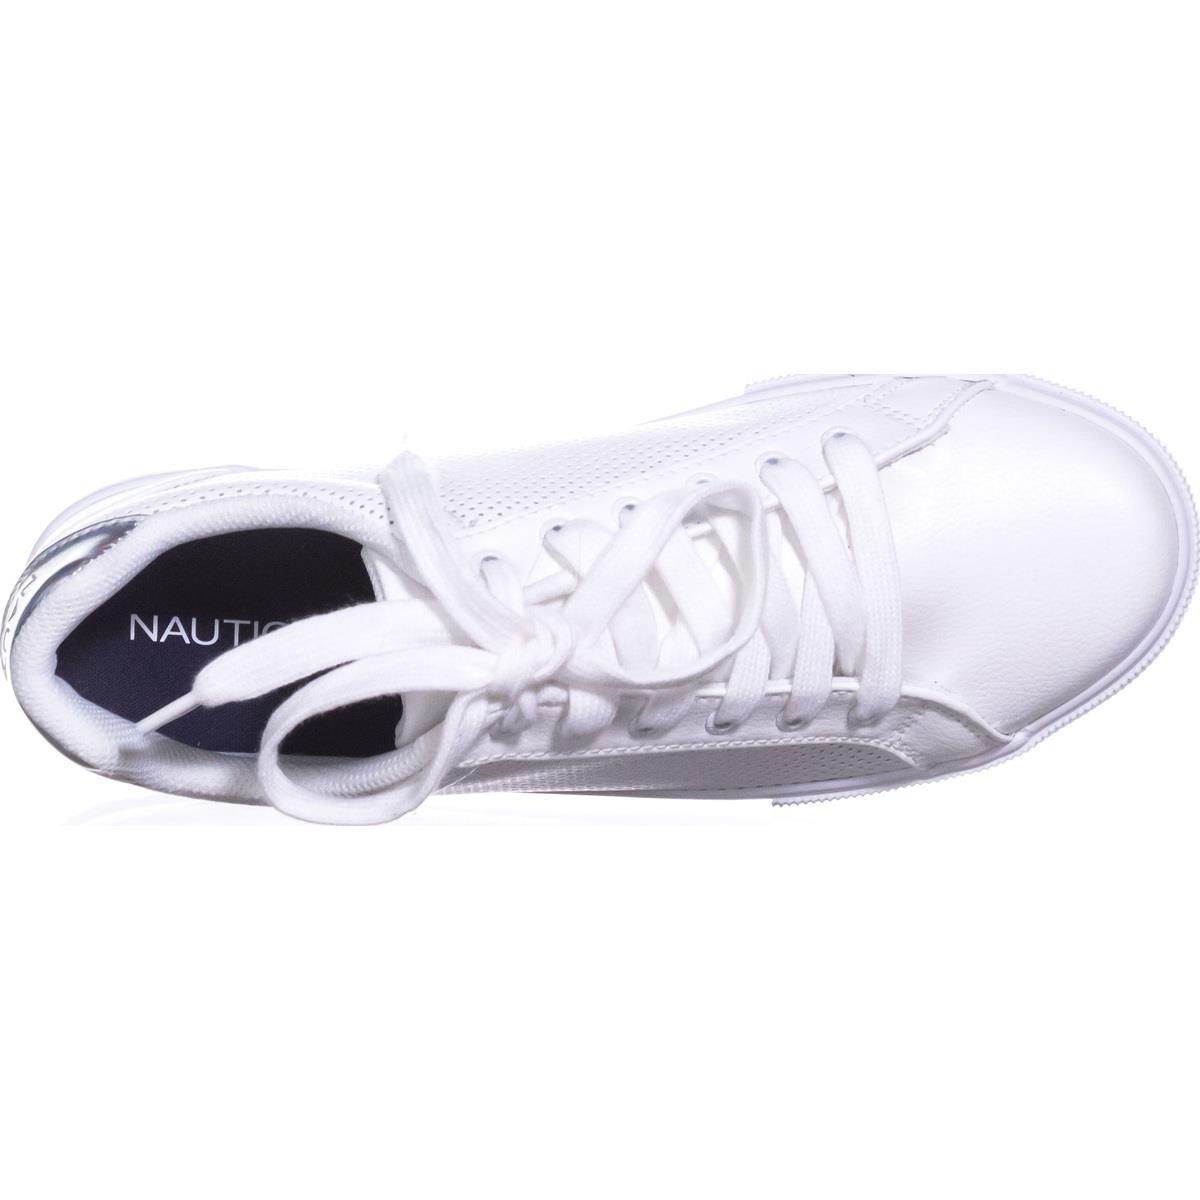 Splendid Stylish and Fashionable Winter and Summer Exclusive Sneakers  Converse Shoes for Men Remarkable - Disclose Styles & Luxe